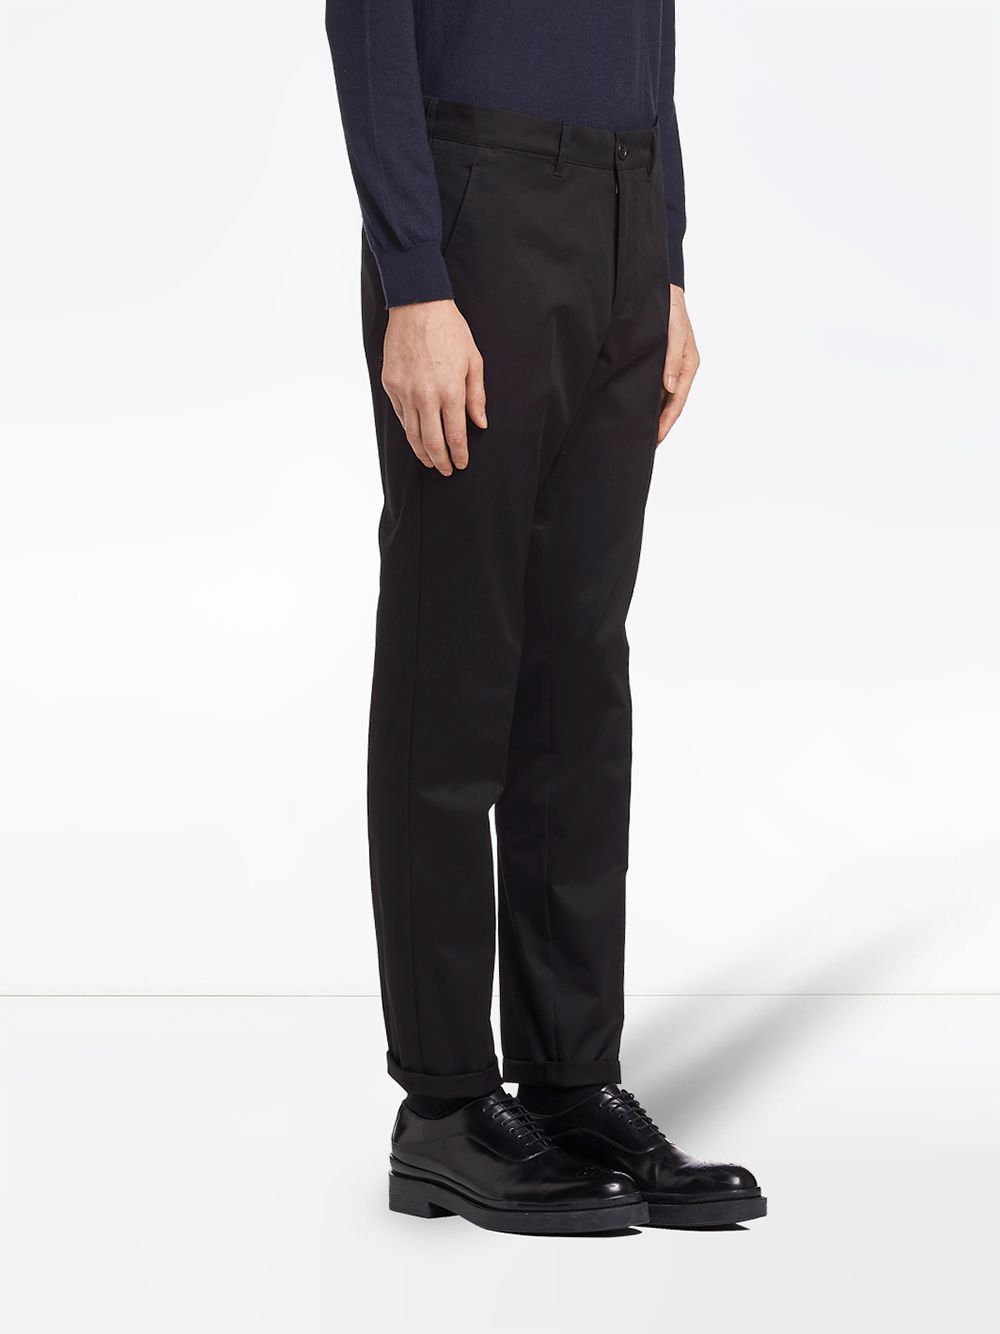 Shop Prada tailored gabardine trousers with Express Delivery - FARFETCH